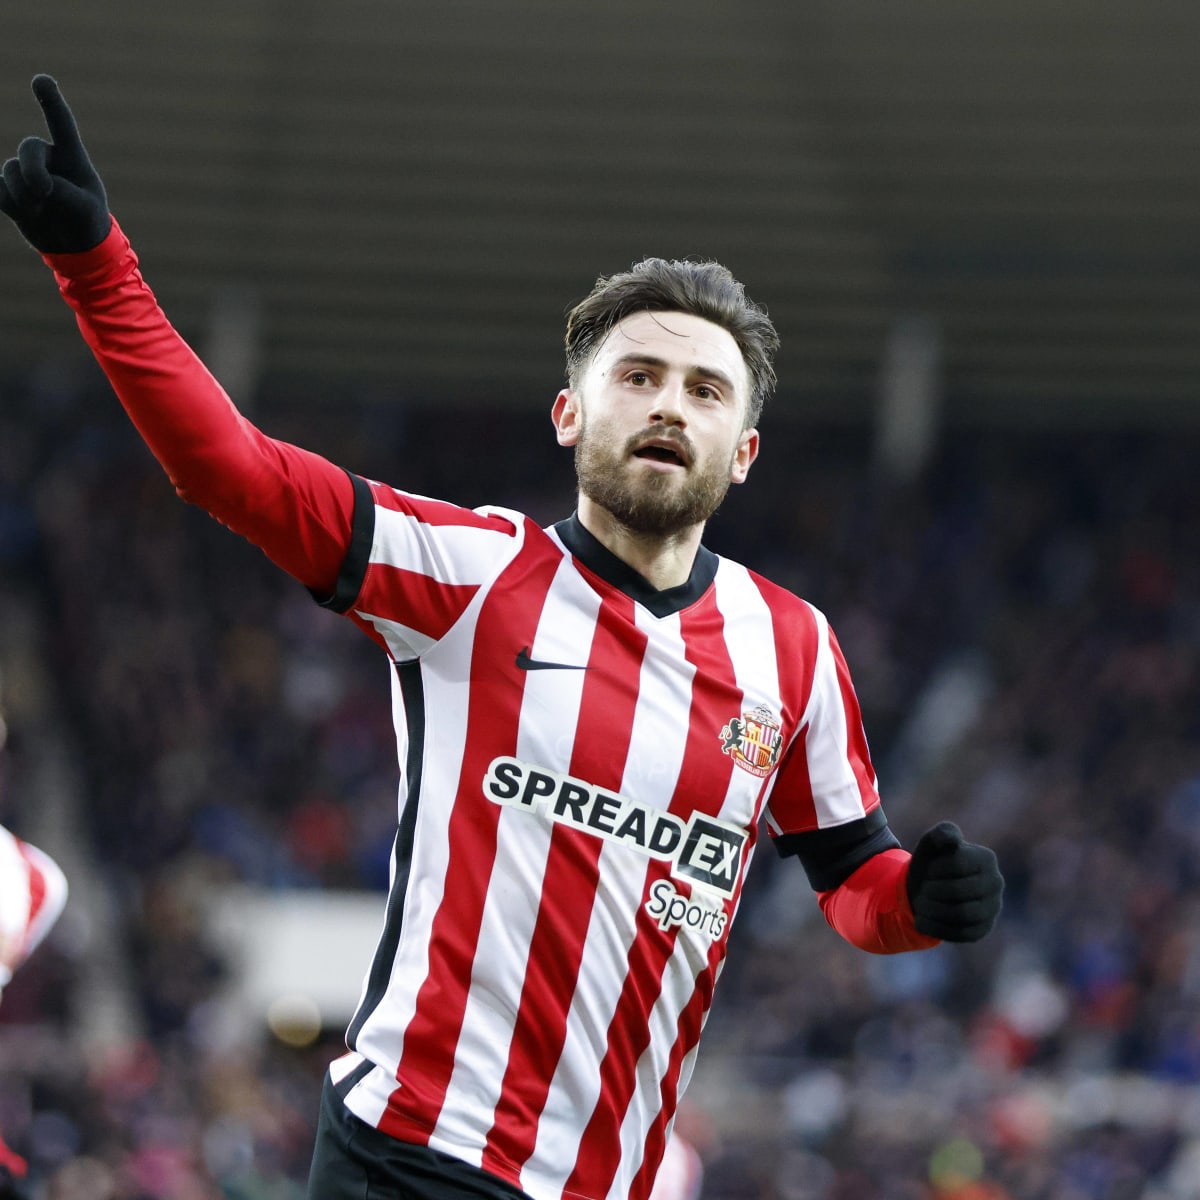 Sunderland AFC Opinion - Looking ahead to the lottery of the play-offs